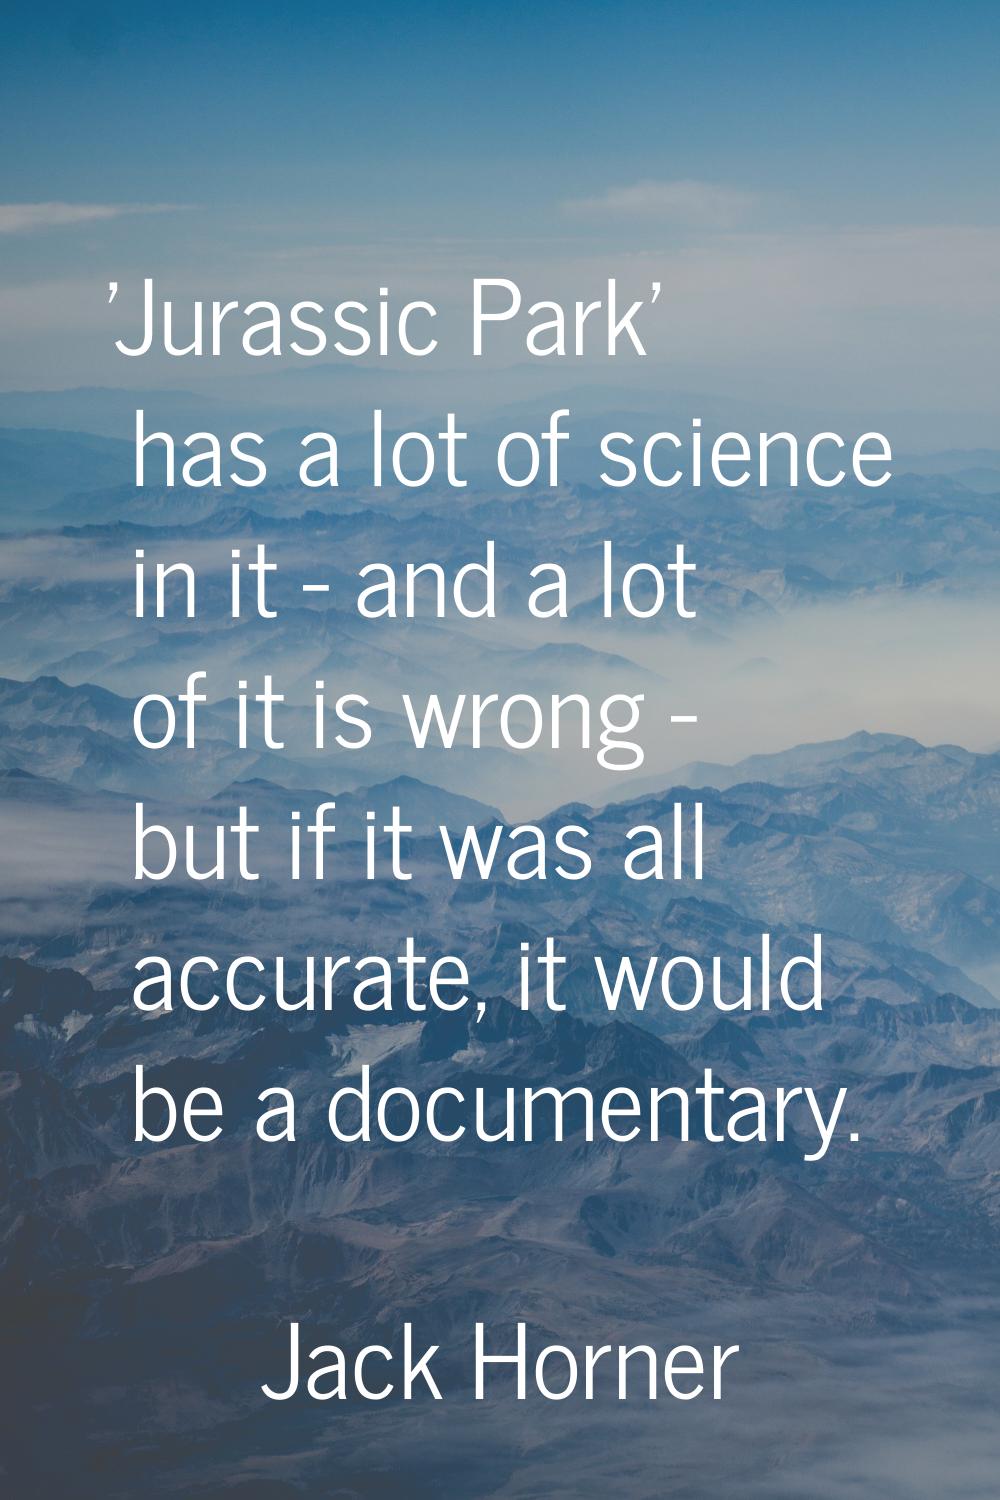 'Jurassic Park' has a lot of science in it - and a lot of it is wrong - but if it was all accurate,